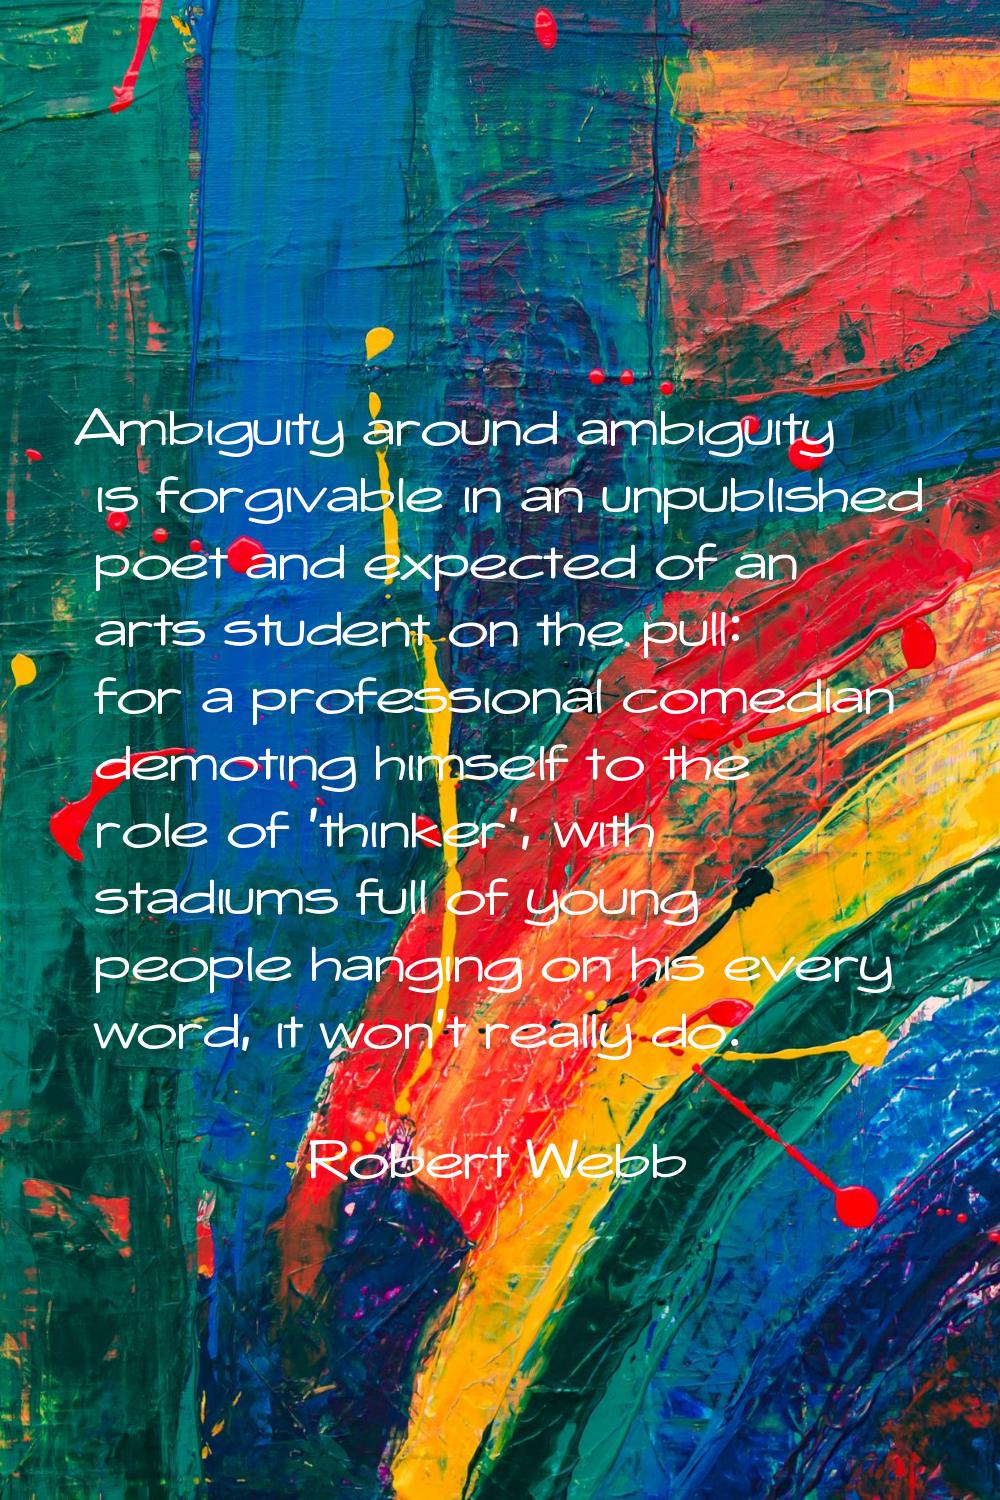 Ambiguity around ambiguity is forgivable in an unpublished poet and expected of an arts student on 